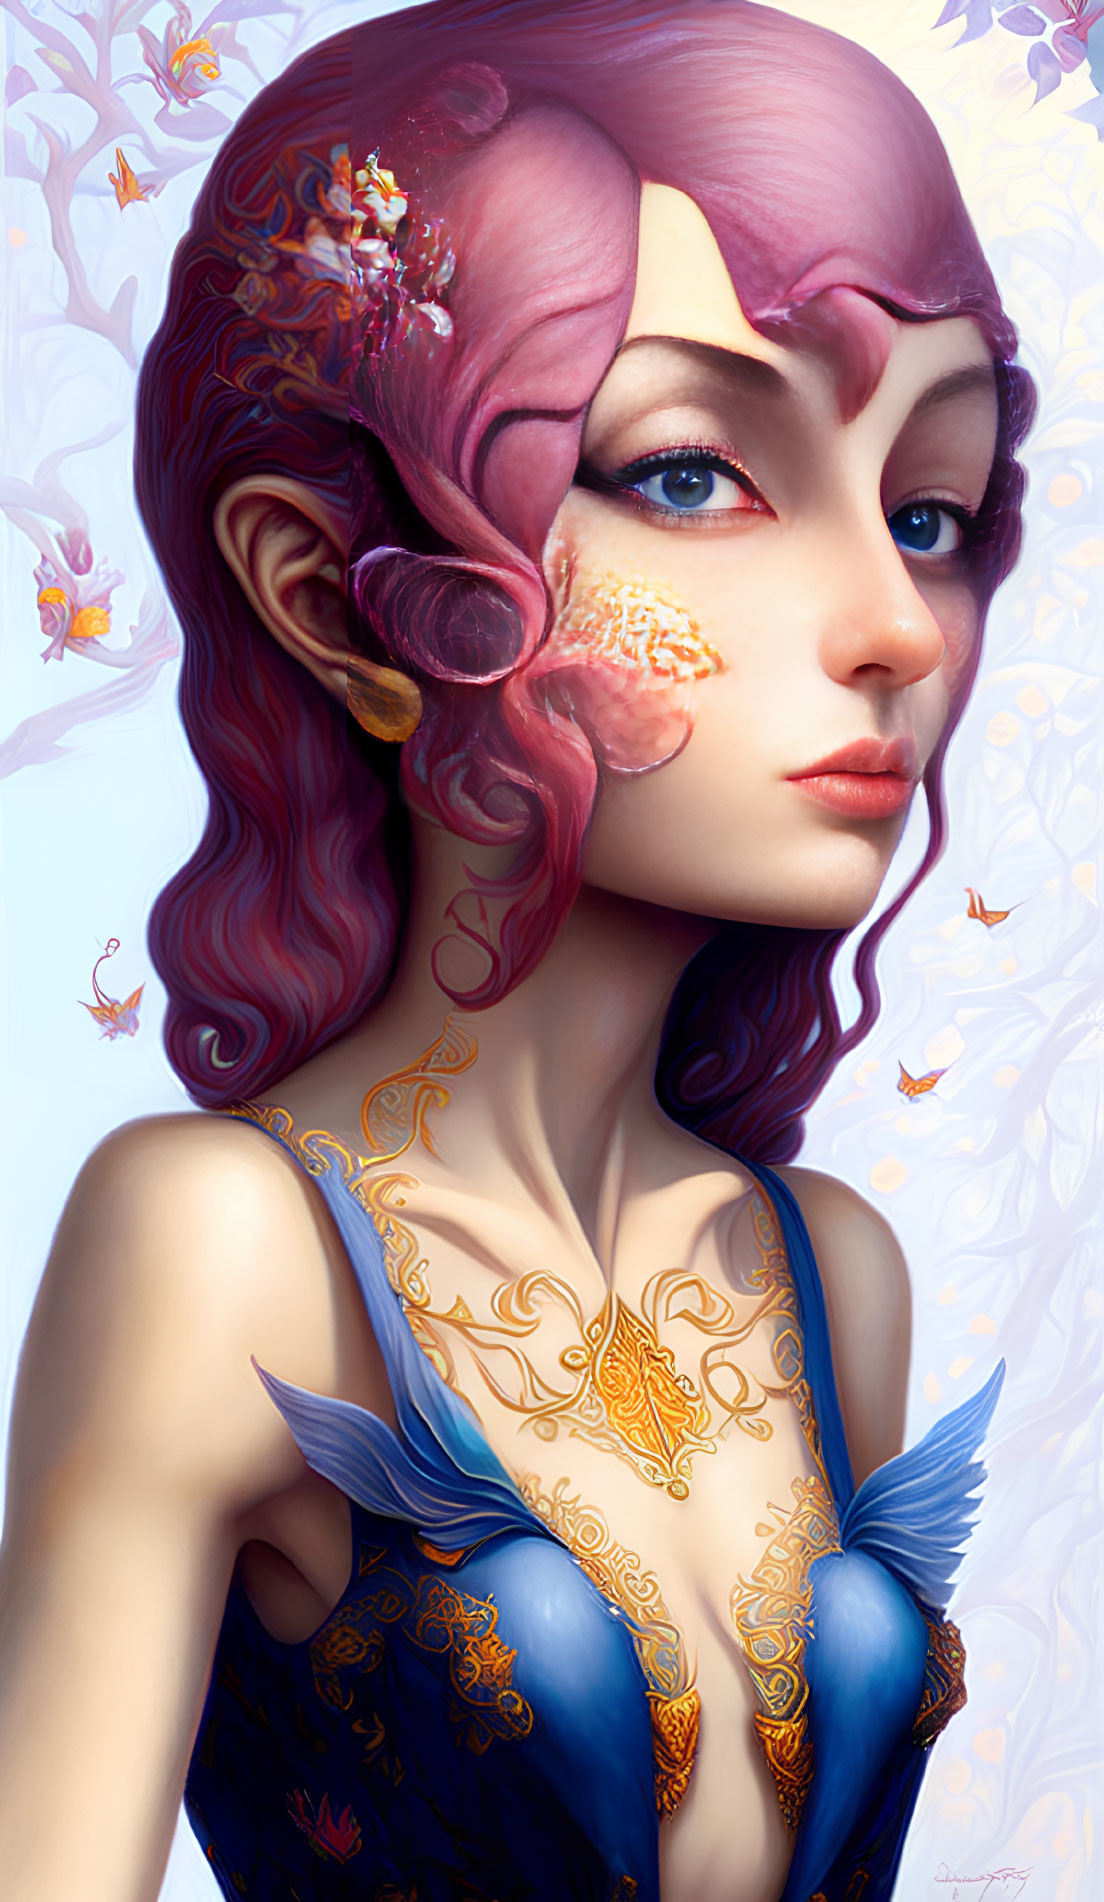 Stylized illustration of woman with pink-purple hair and elfin ears surrounded by butterflies